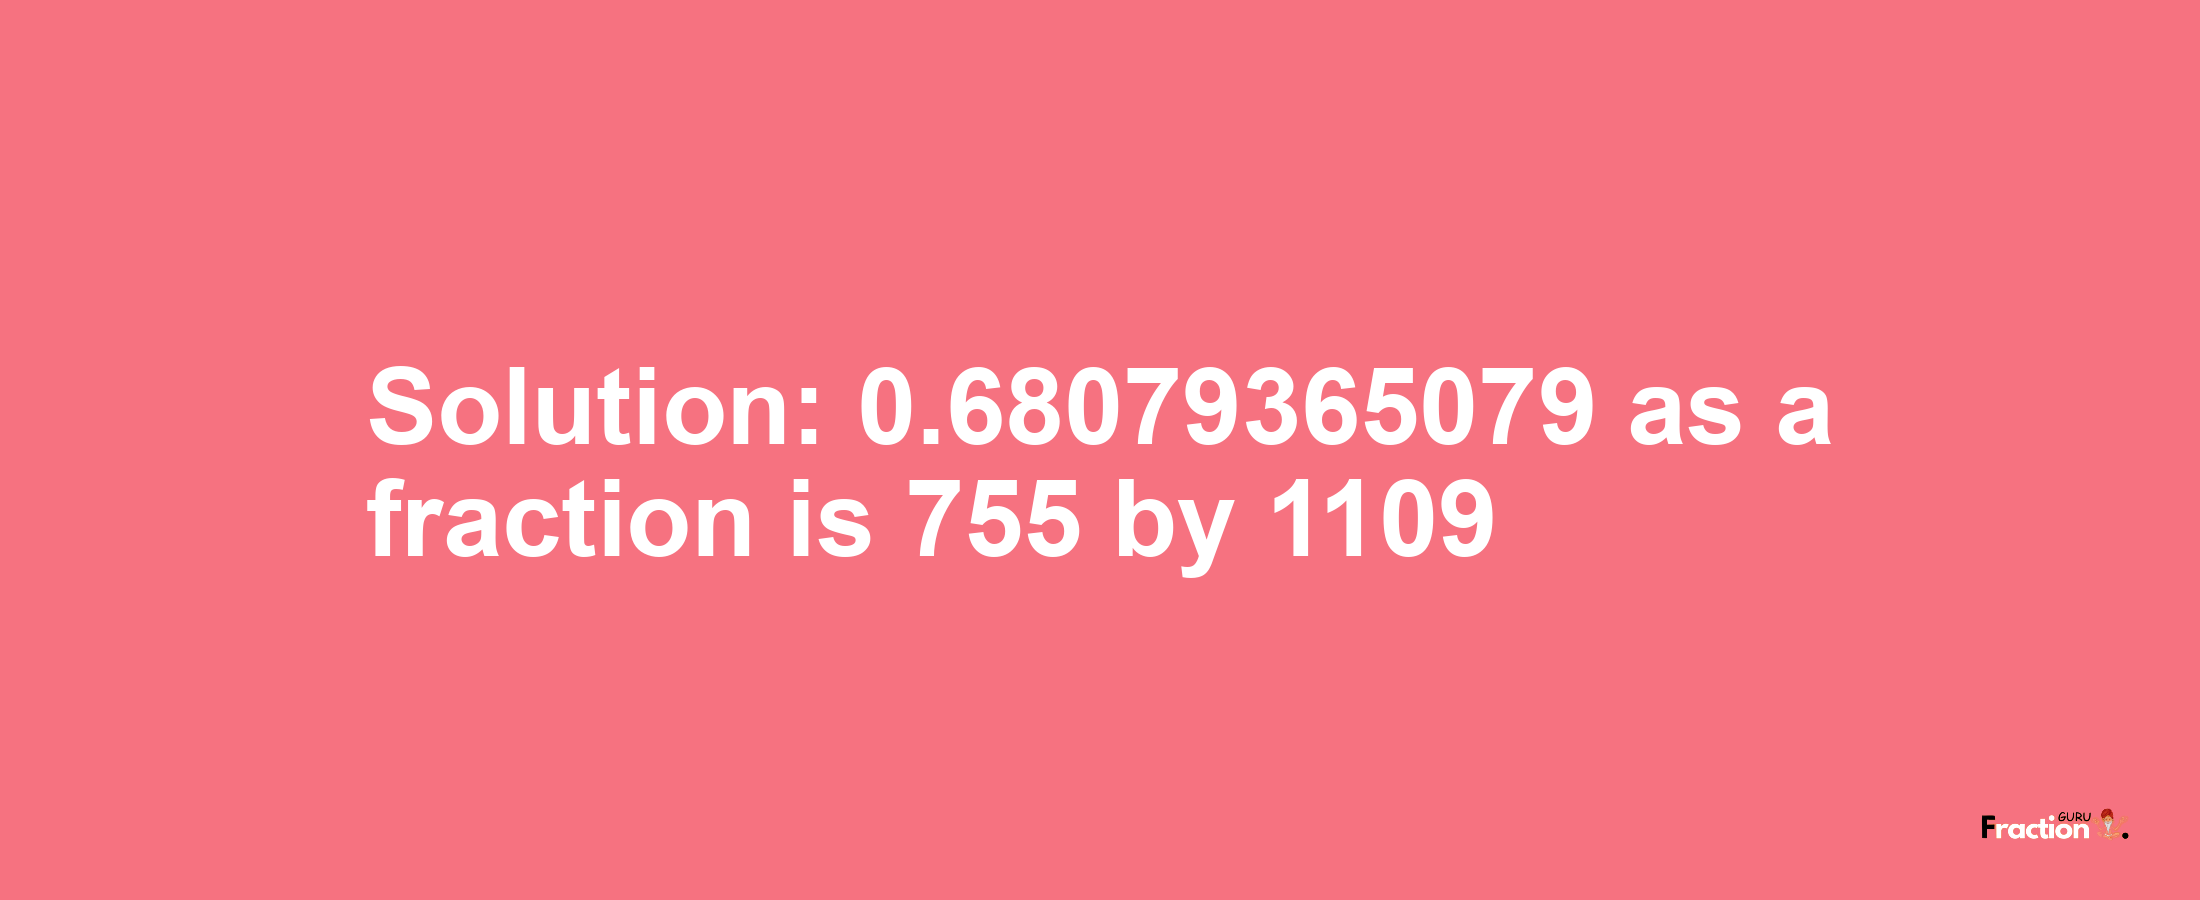 Solution:0.68079365079 as a fraction is 755/1109